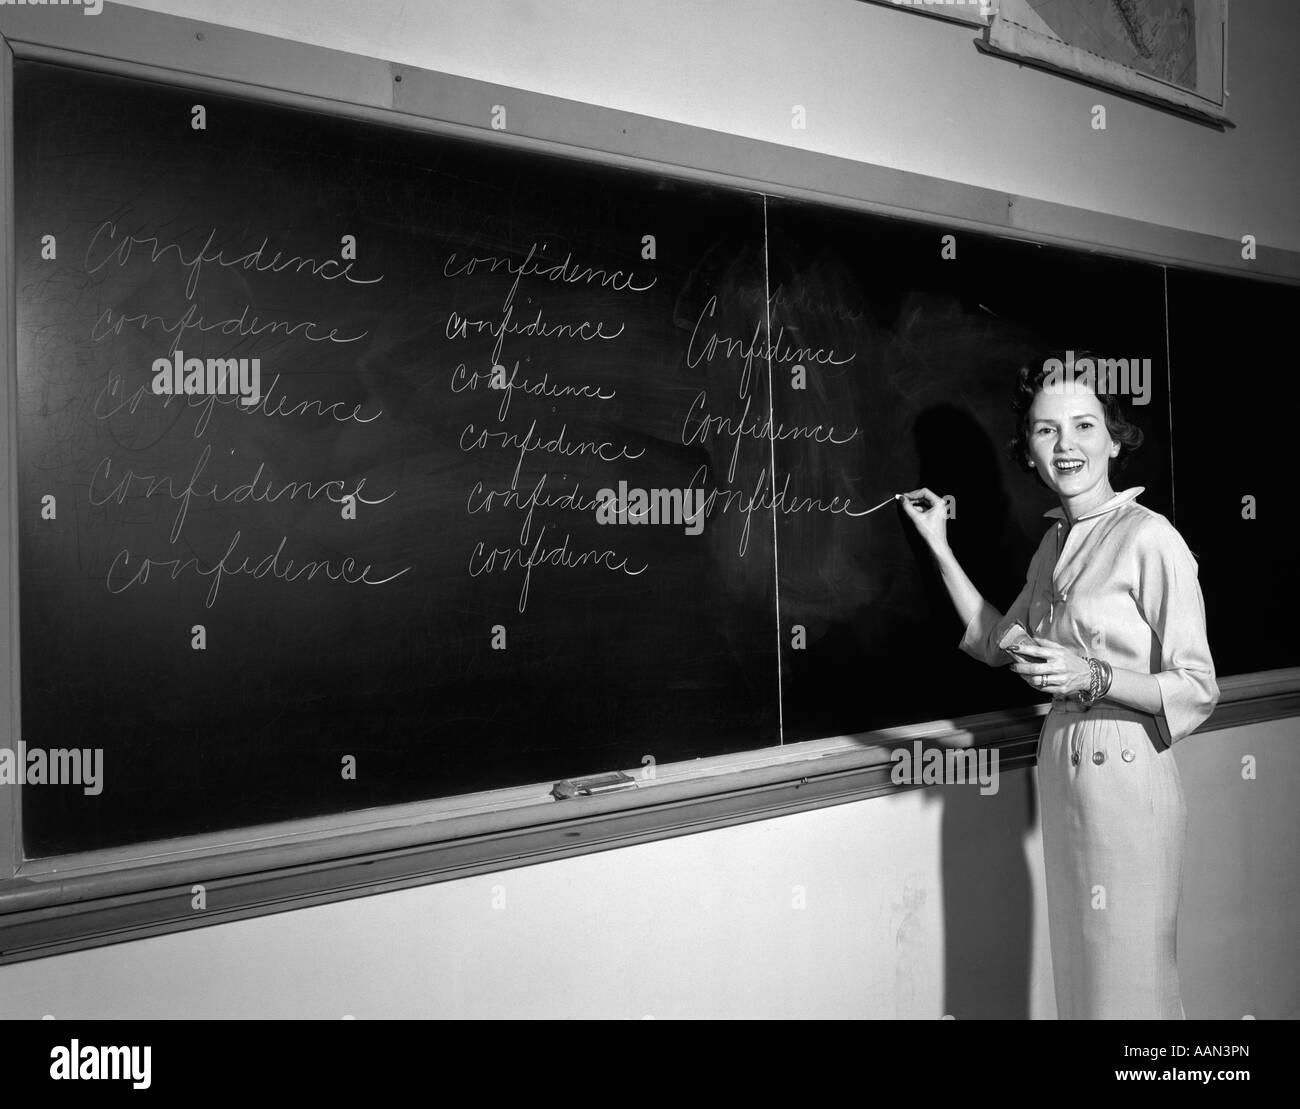 1950s TEACHER IN FRONT OF CLASSROOM WRITING CONFIDENCE ON BLACKBOARD Stock Photo